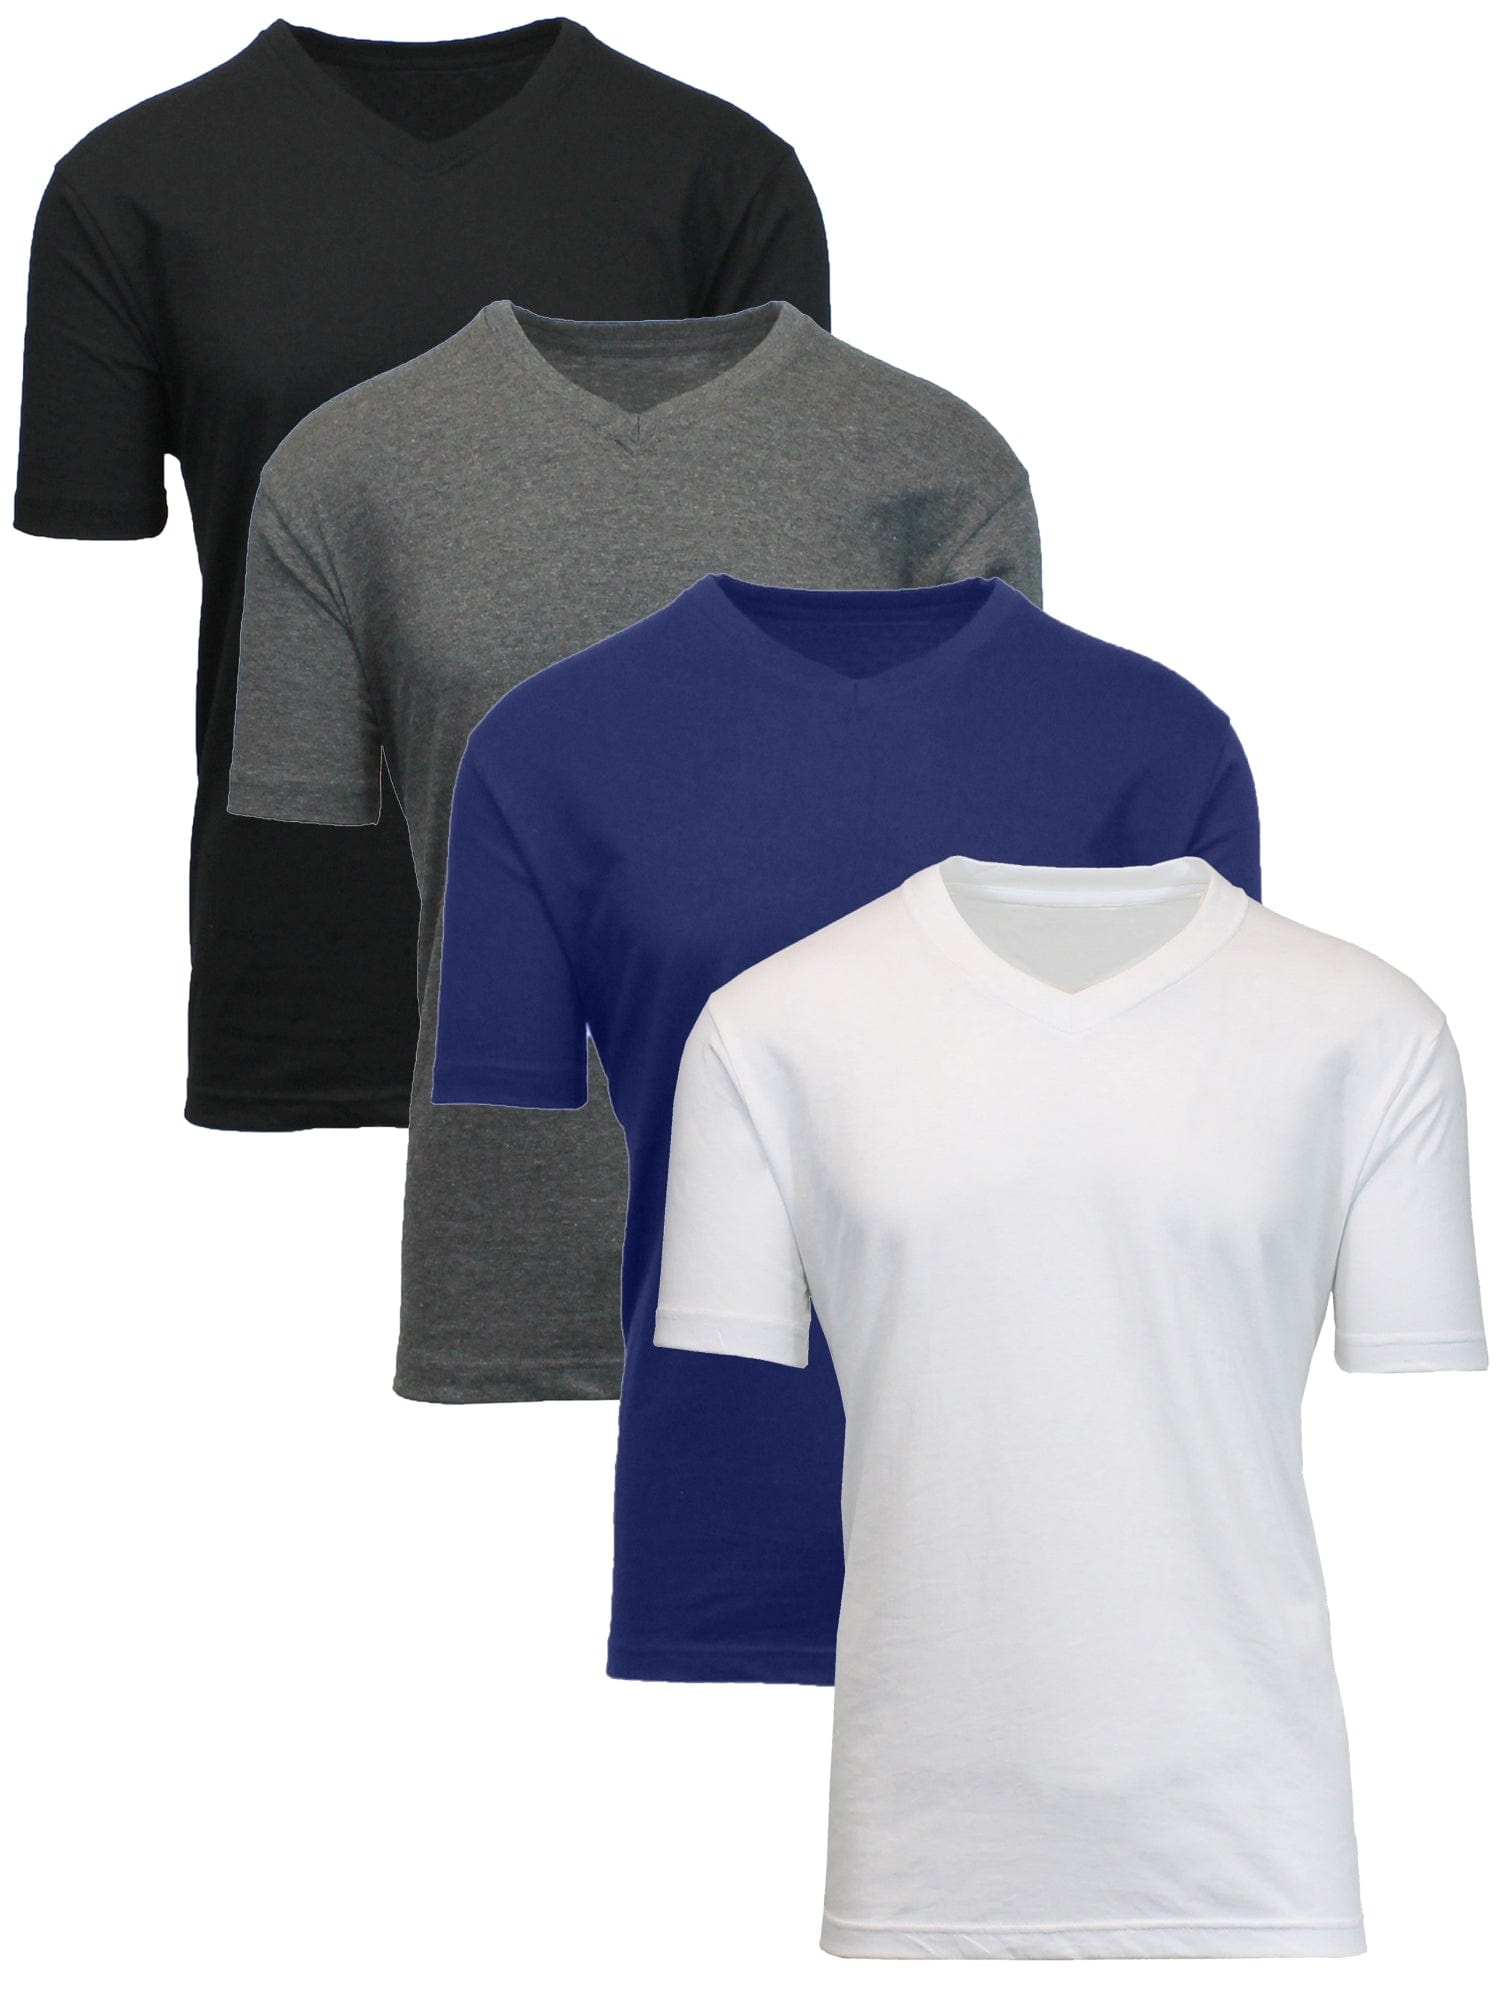 Men's (4-Pack) Short Sleeve V-Neck Modern Fit Classic Tees (S-3XL) - GalaxybyHarvic